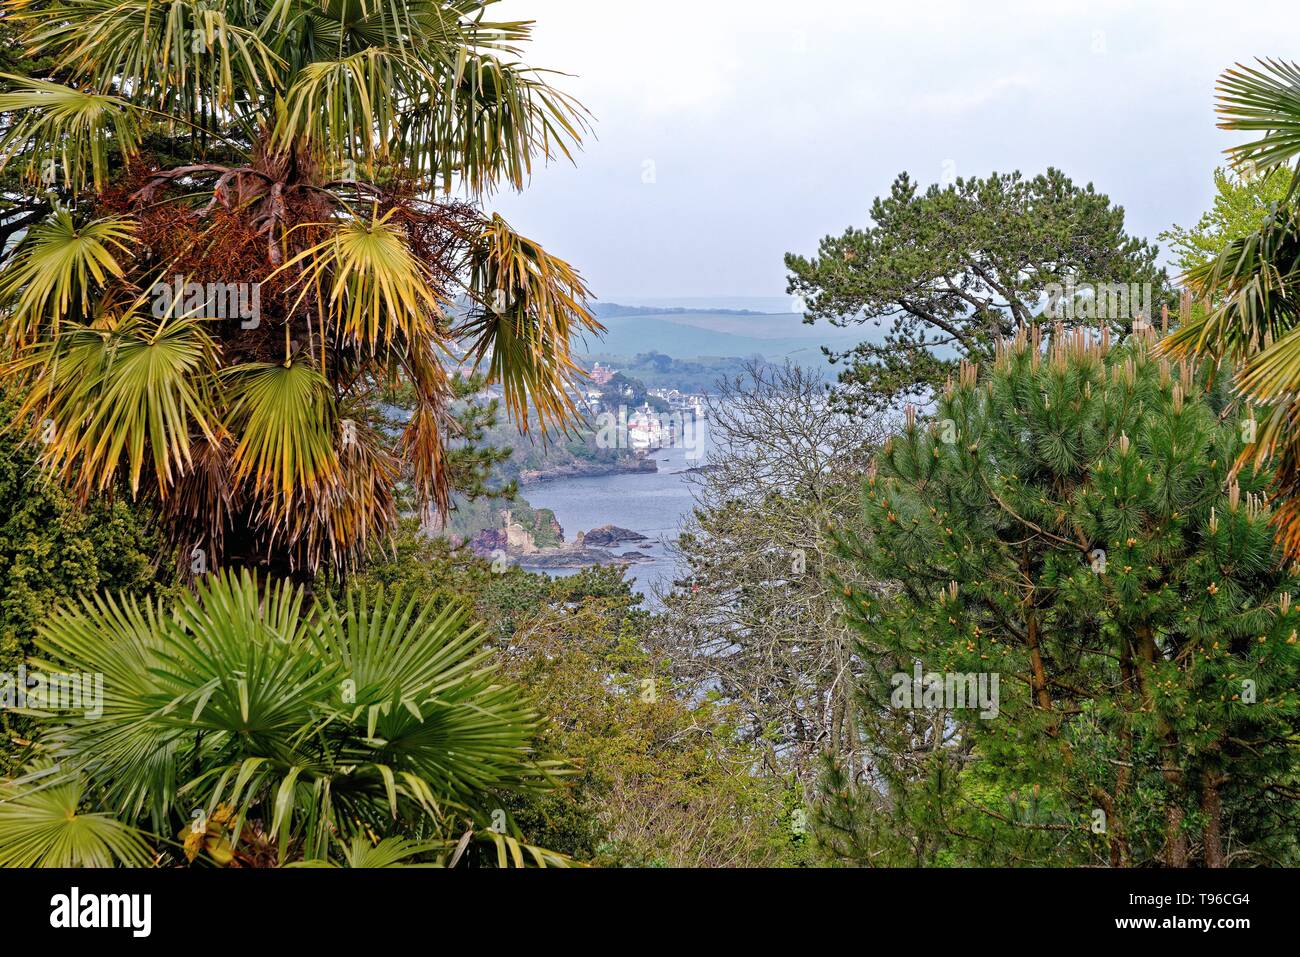 Salcombe town and estuary as seen from a high viewpoint with sub tropical plants in the foreground, Devon England UK Stock Photo